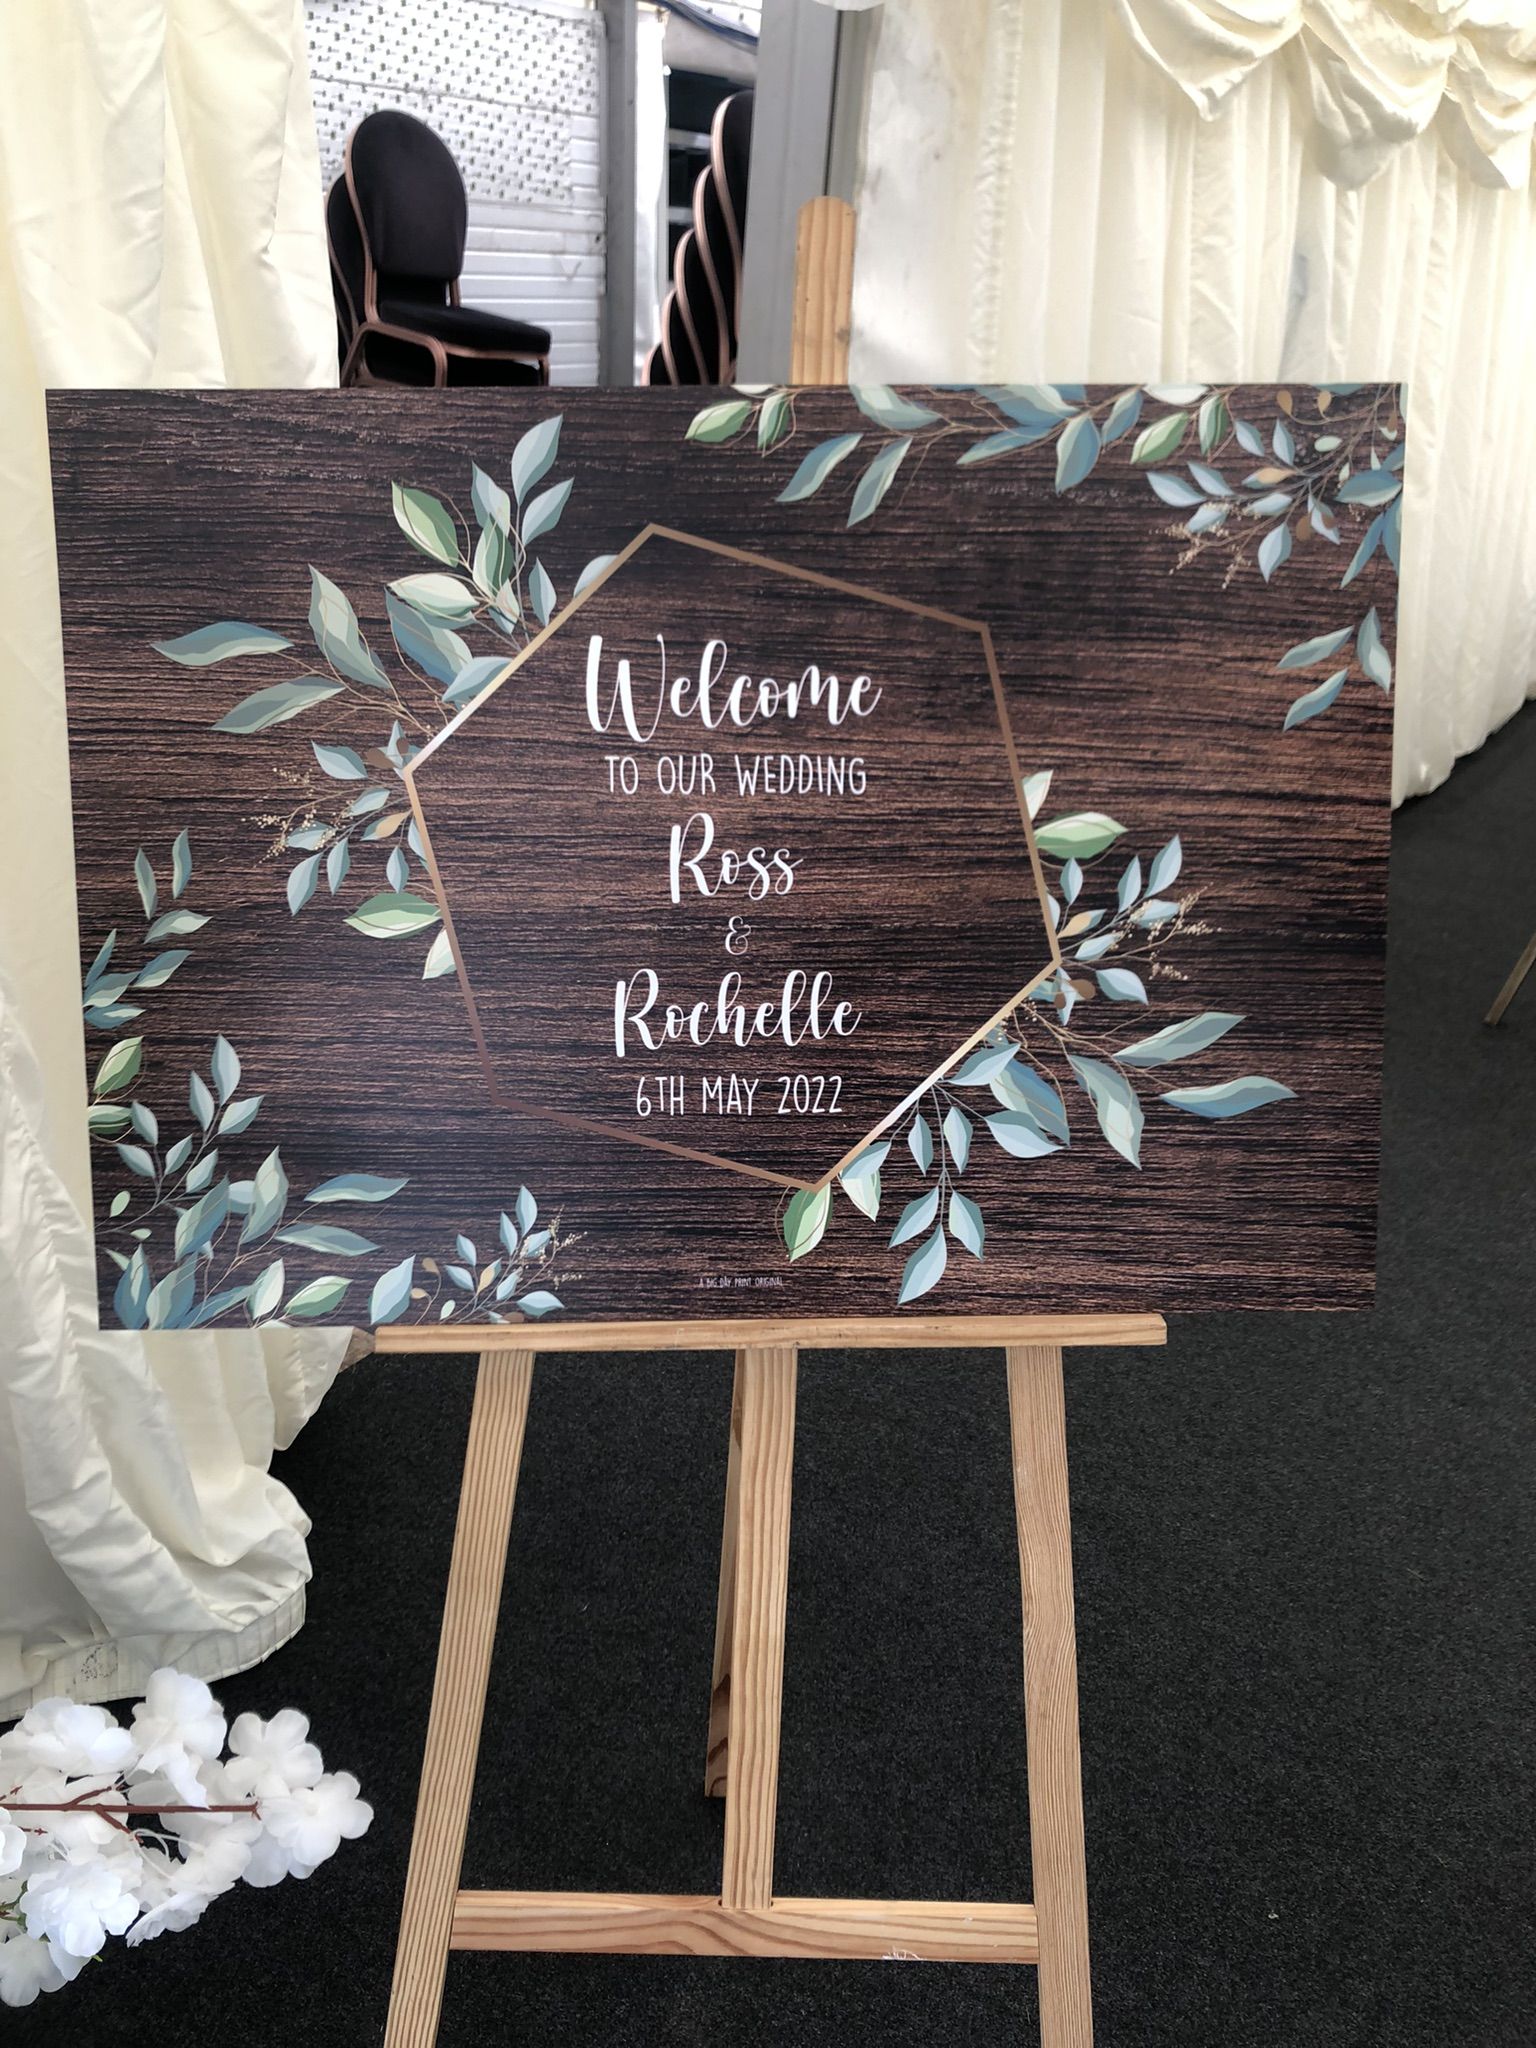 a welcome to our wedding sign on a easel.